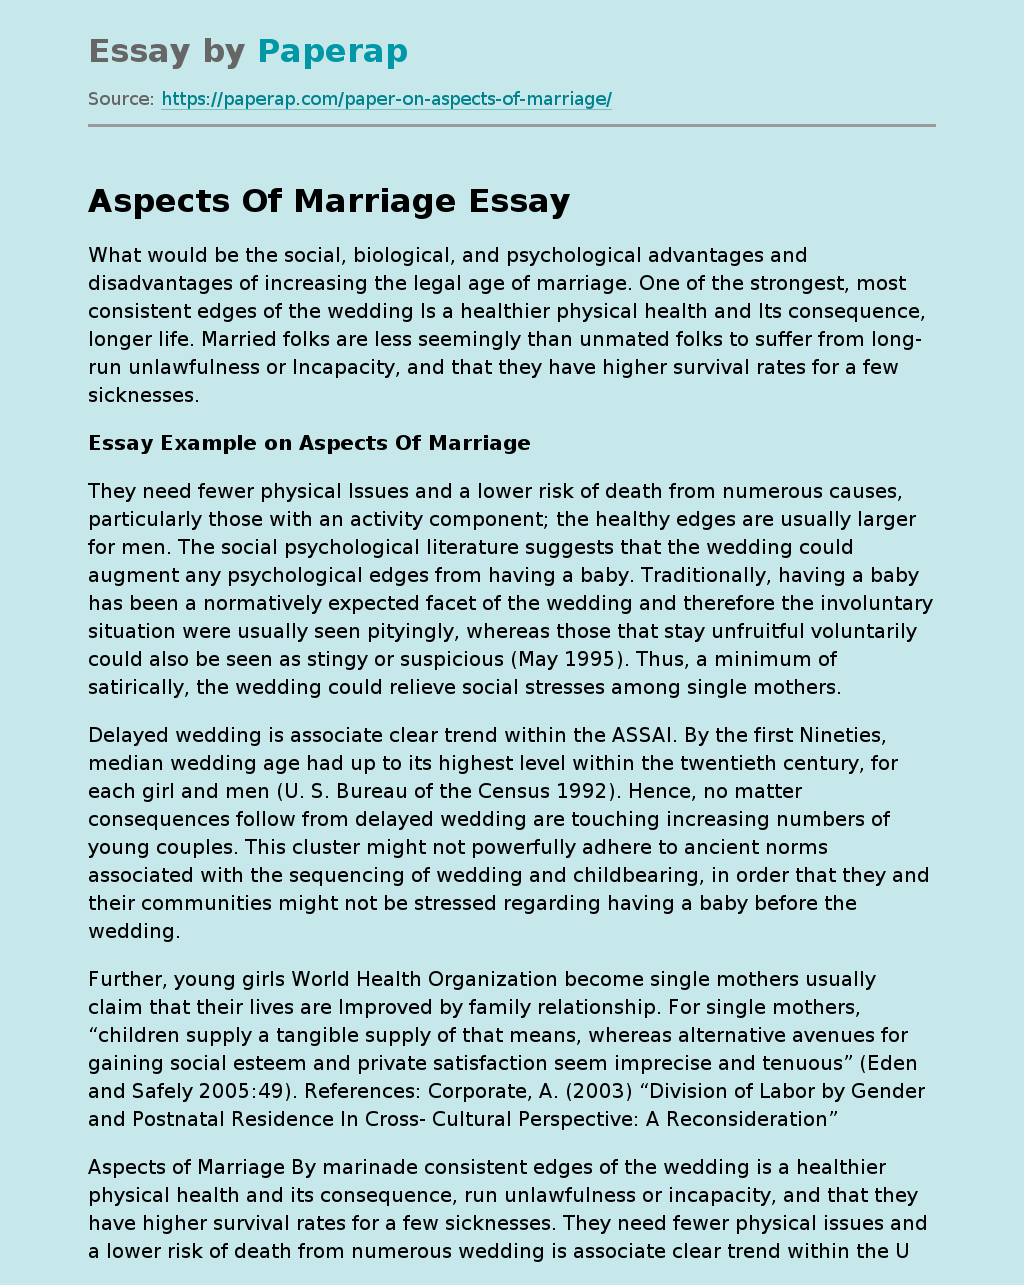 Aspects Of Marriage